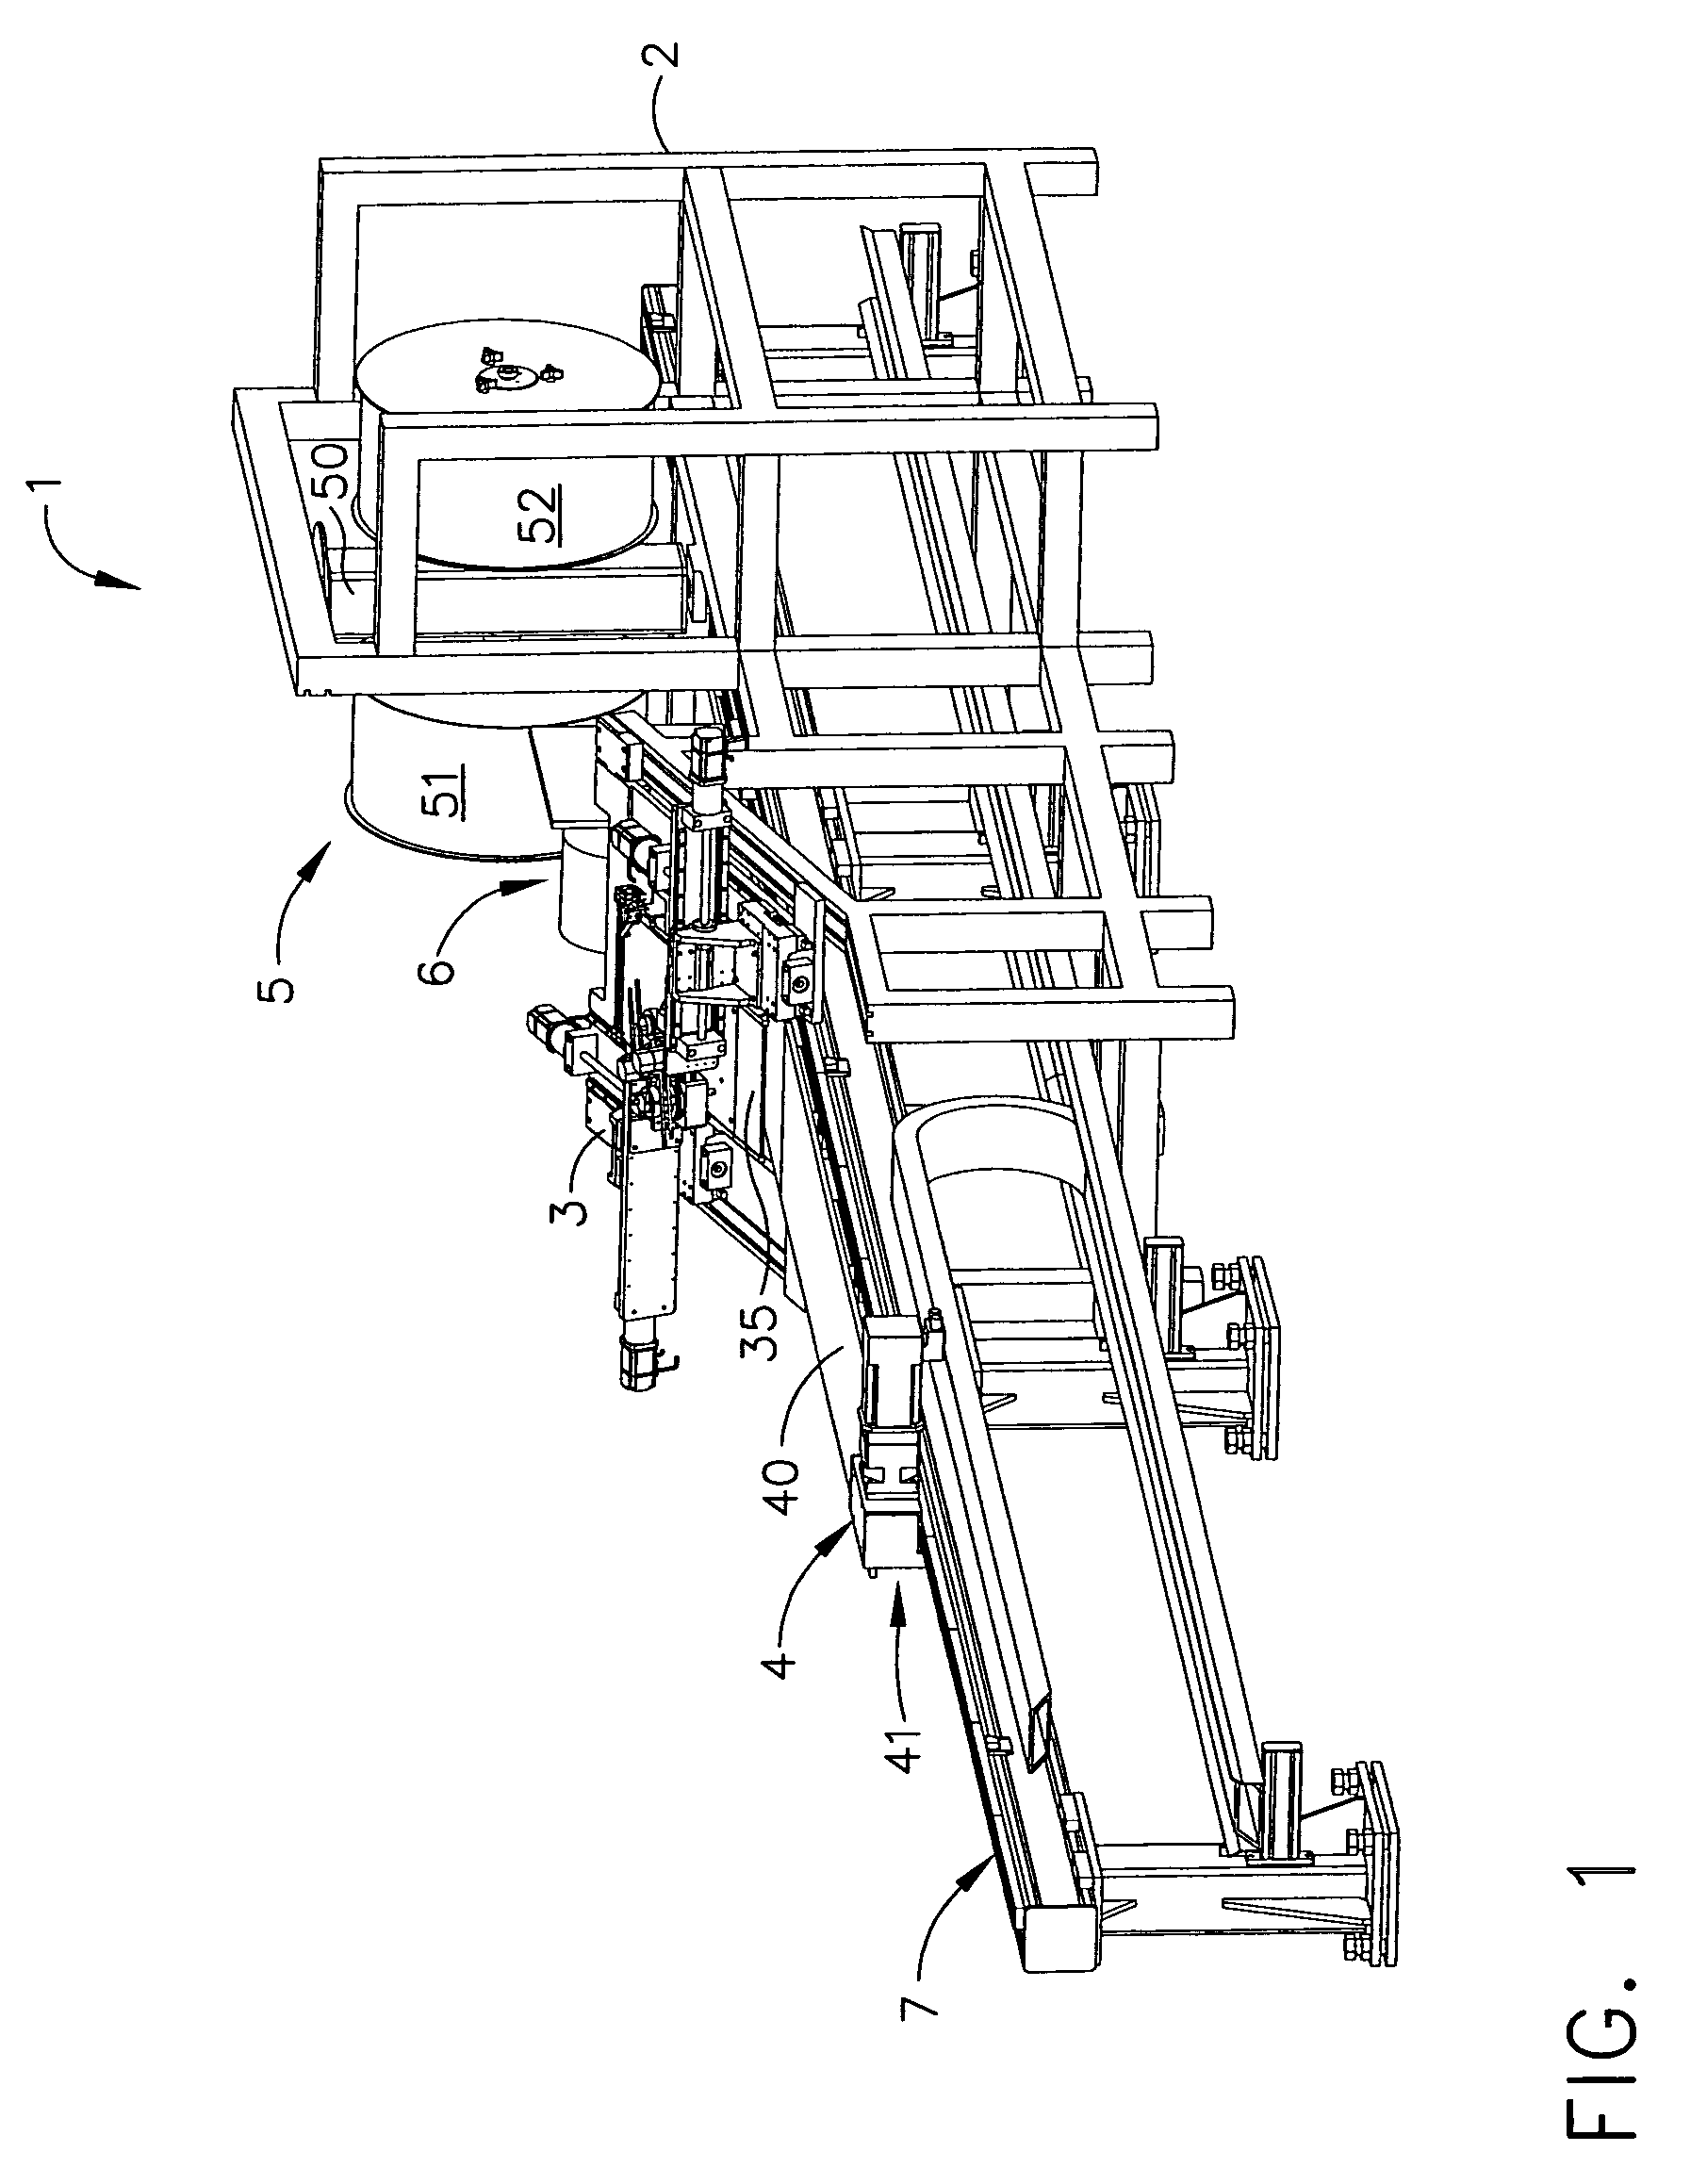 Apparatus and method for composite material trim-on-the-fly